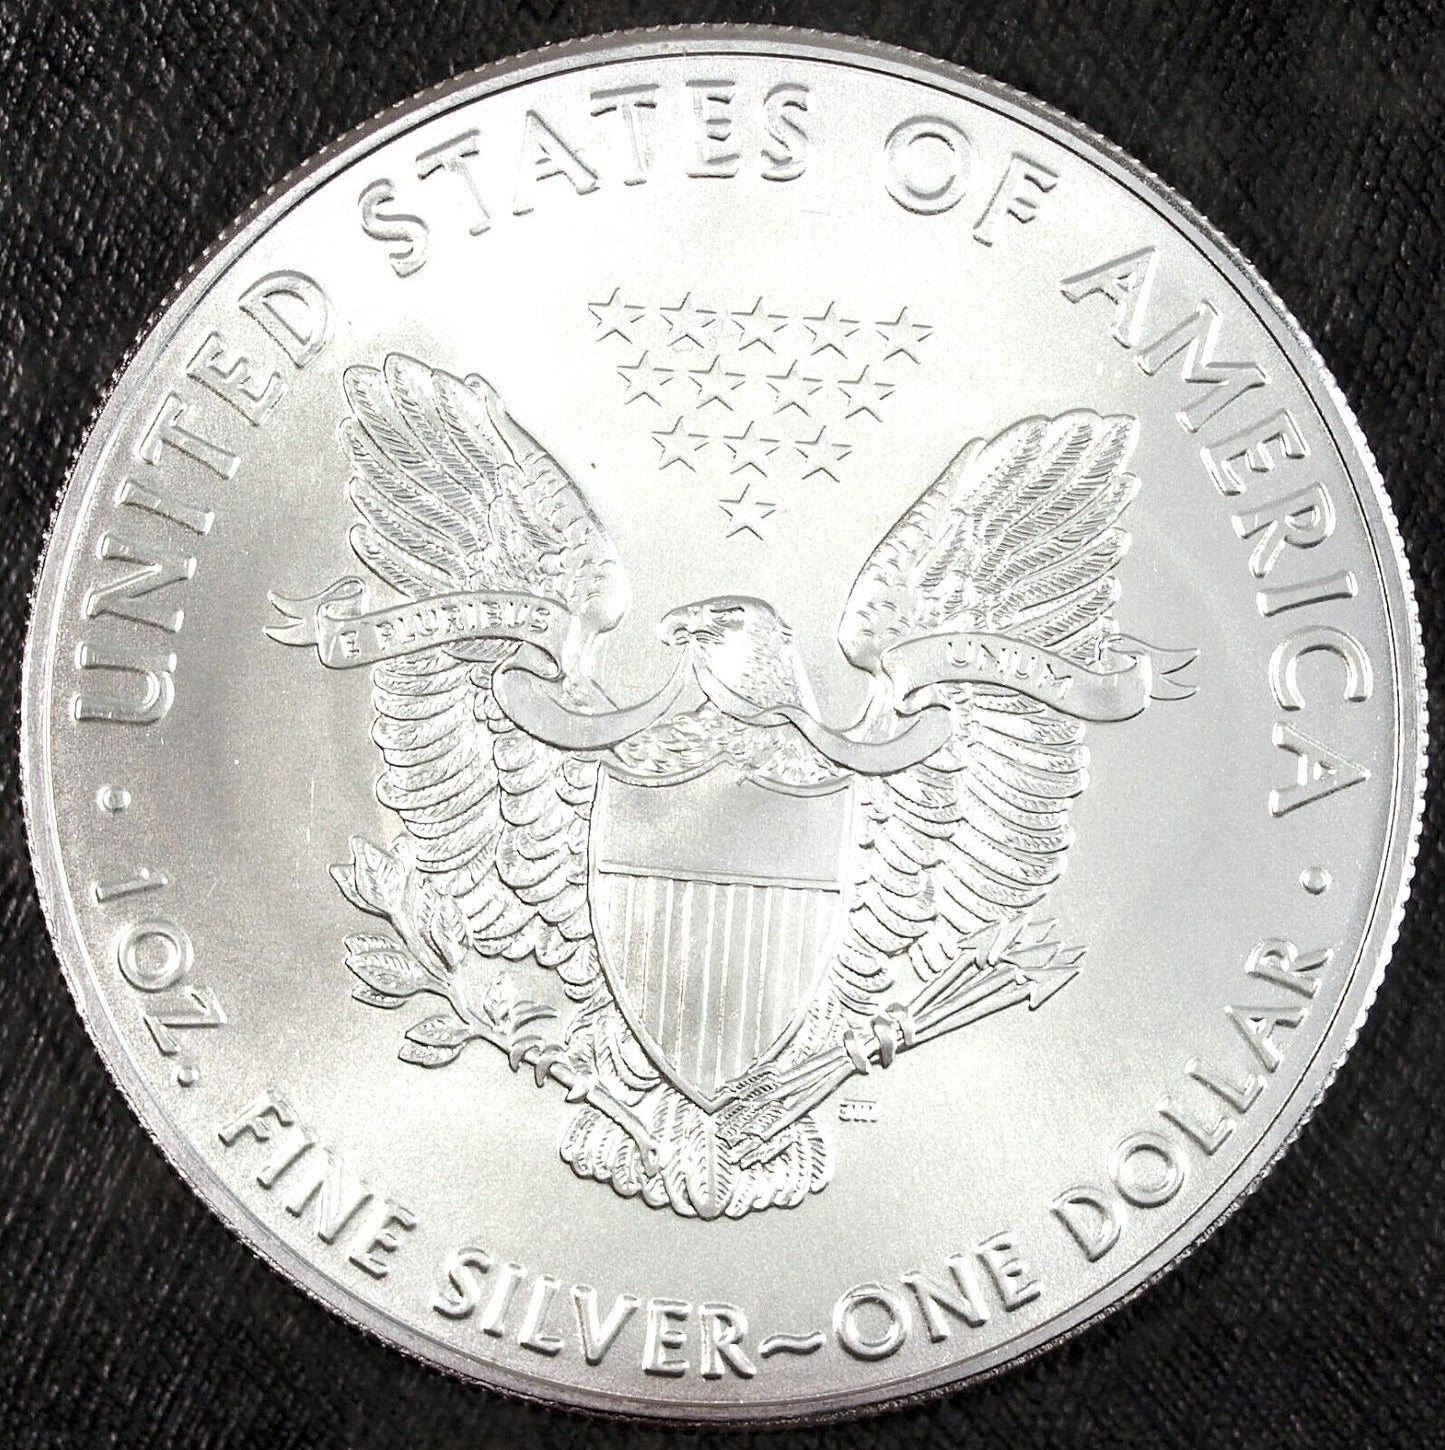 2011 U.S. Mint American Silver Eagle ☆☆ Uncirculated ☆☆ Great Collectible 181